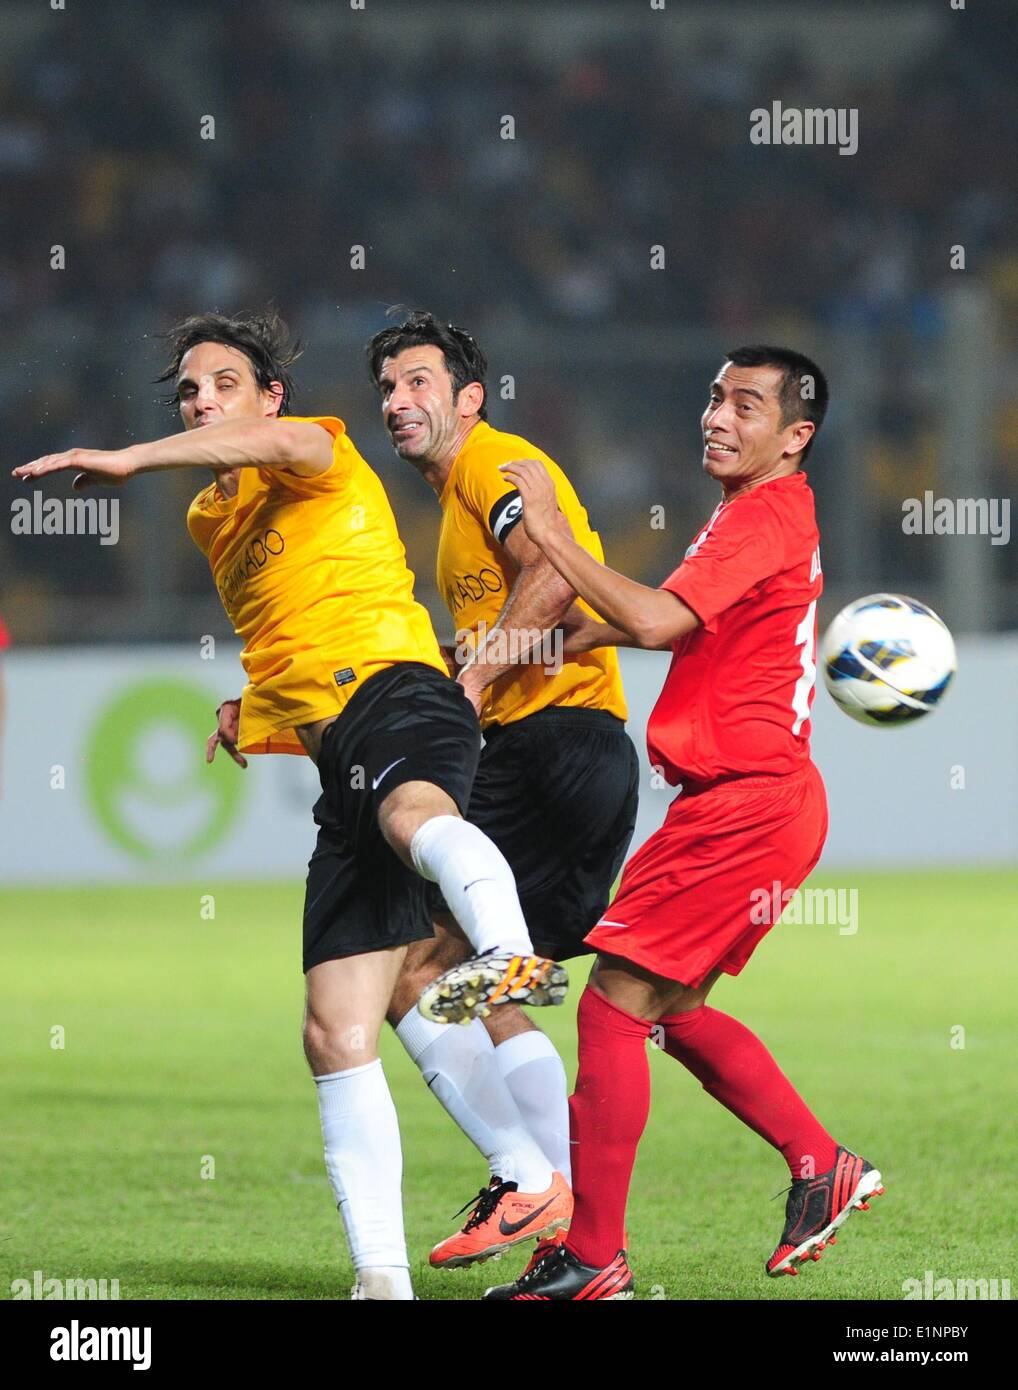 Jakarta, Indonesia. 7th June, 2014. International Legends Team players Nuno Gomes (L) and Luis Figo (C) vies for the ball with Indonesian Legends Team player Gusnedi Adang during the Football Legends Tour 2014 at Gelora Bung Karno Stadium in Jakarta, Indonesia, on June 7, 2014. International team won 5-2. © Zulkarnain/Xinhua/Alamy Live News Stock Photo